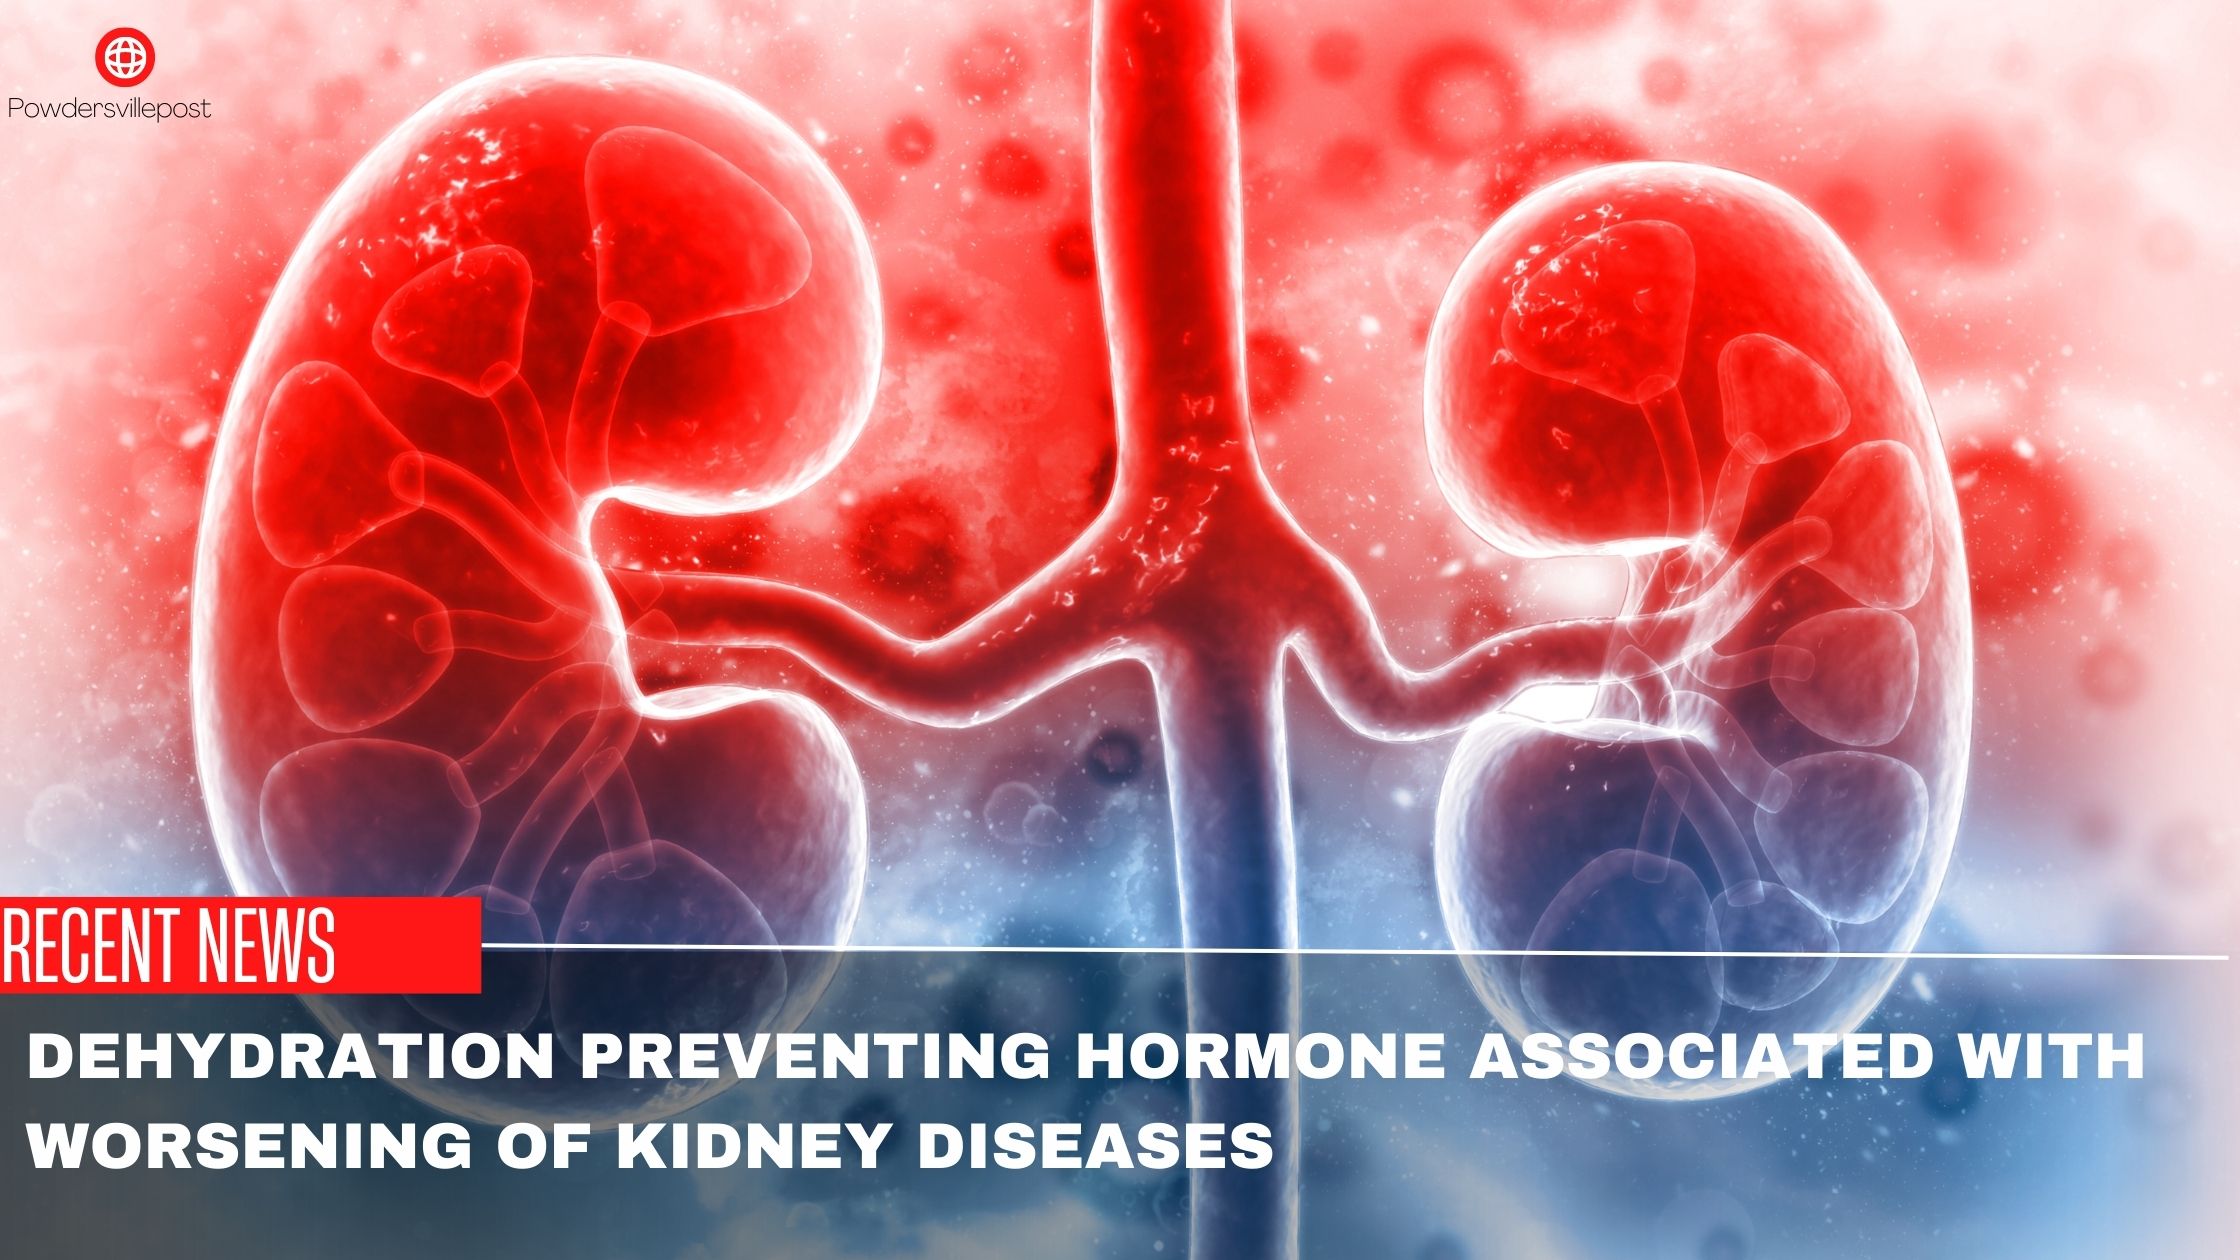 Dehydration Preventing Hormone Associated With Worsening Of Kidney Diseases